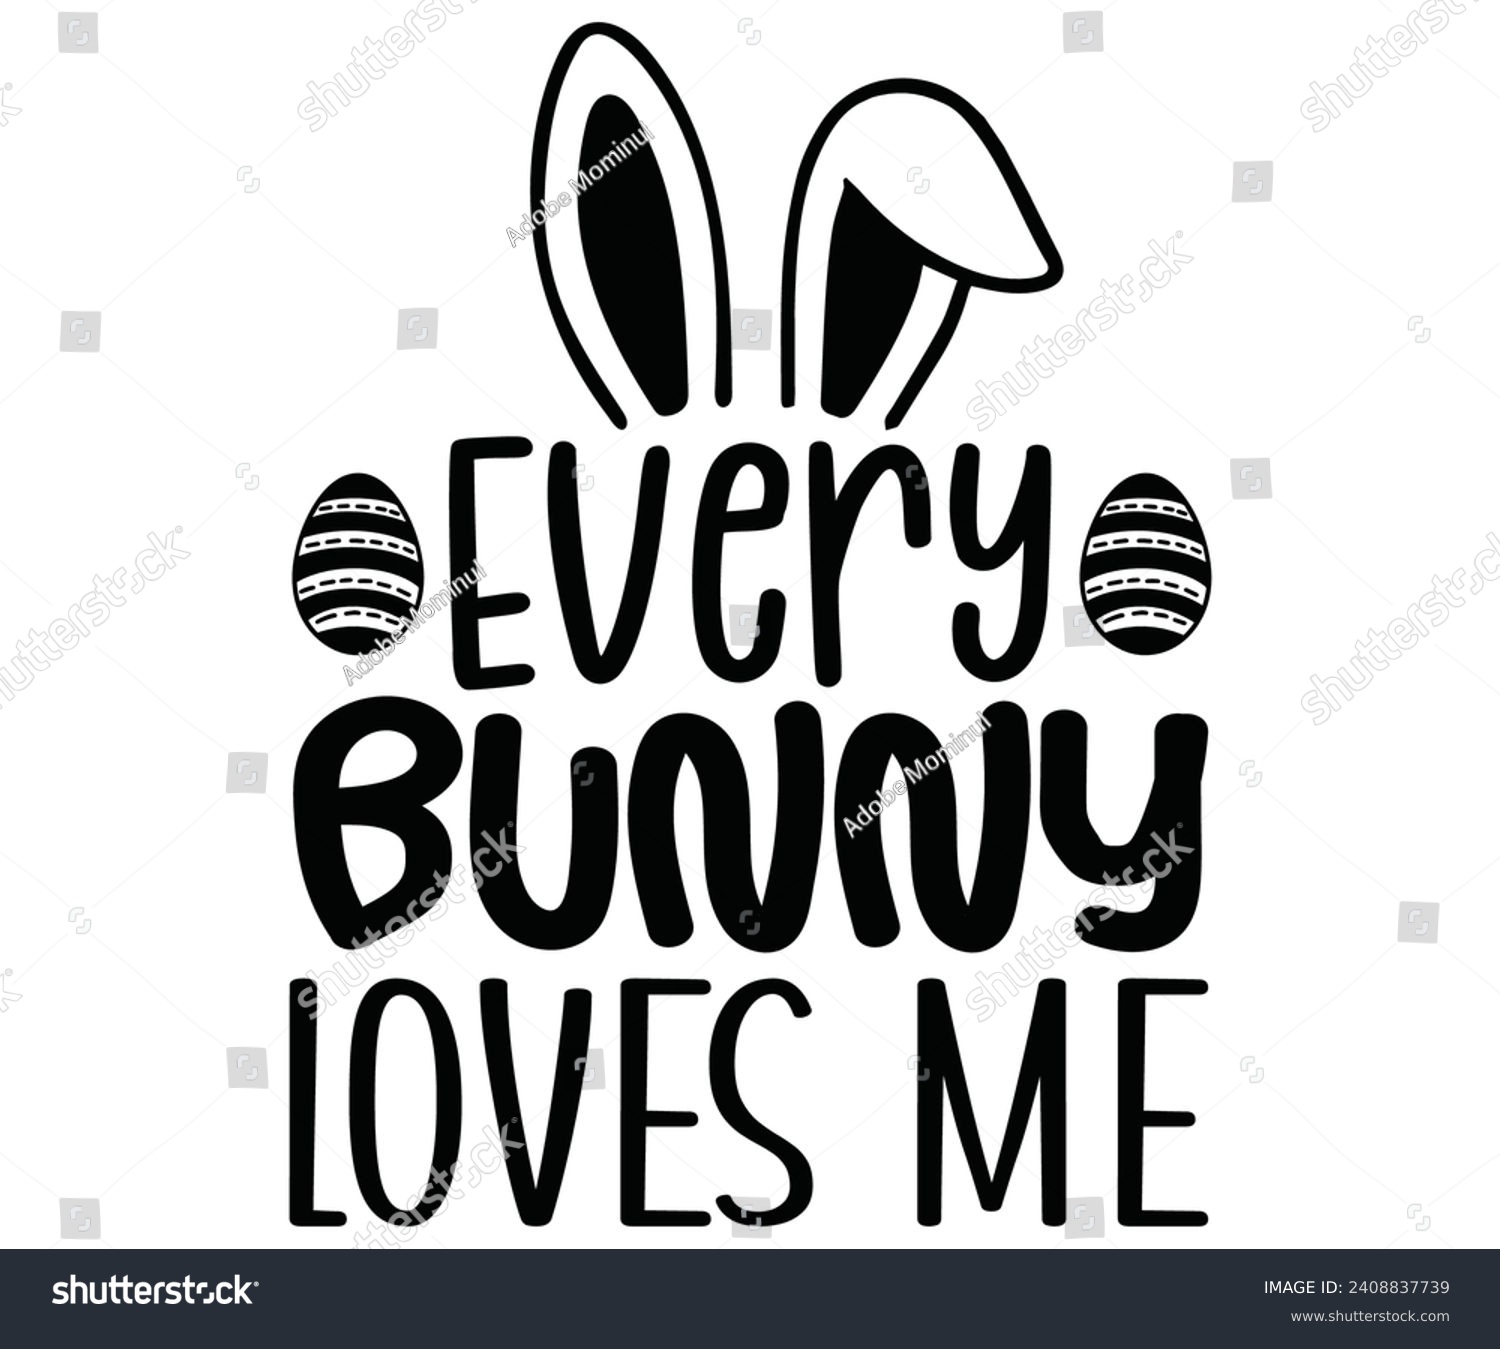 SVG of Every Bunny Loves Me Svg,Happy Easter Svg,Png,Bunny Svg,Retro Easter Svg,Easter Quotes,Spring Svg,Easter Shirt Svg,Easter Gift Svg,Funny Easter Svg,Bunny Day, Egg for Kids,Cut Files,Cricut, svg